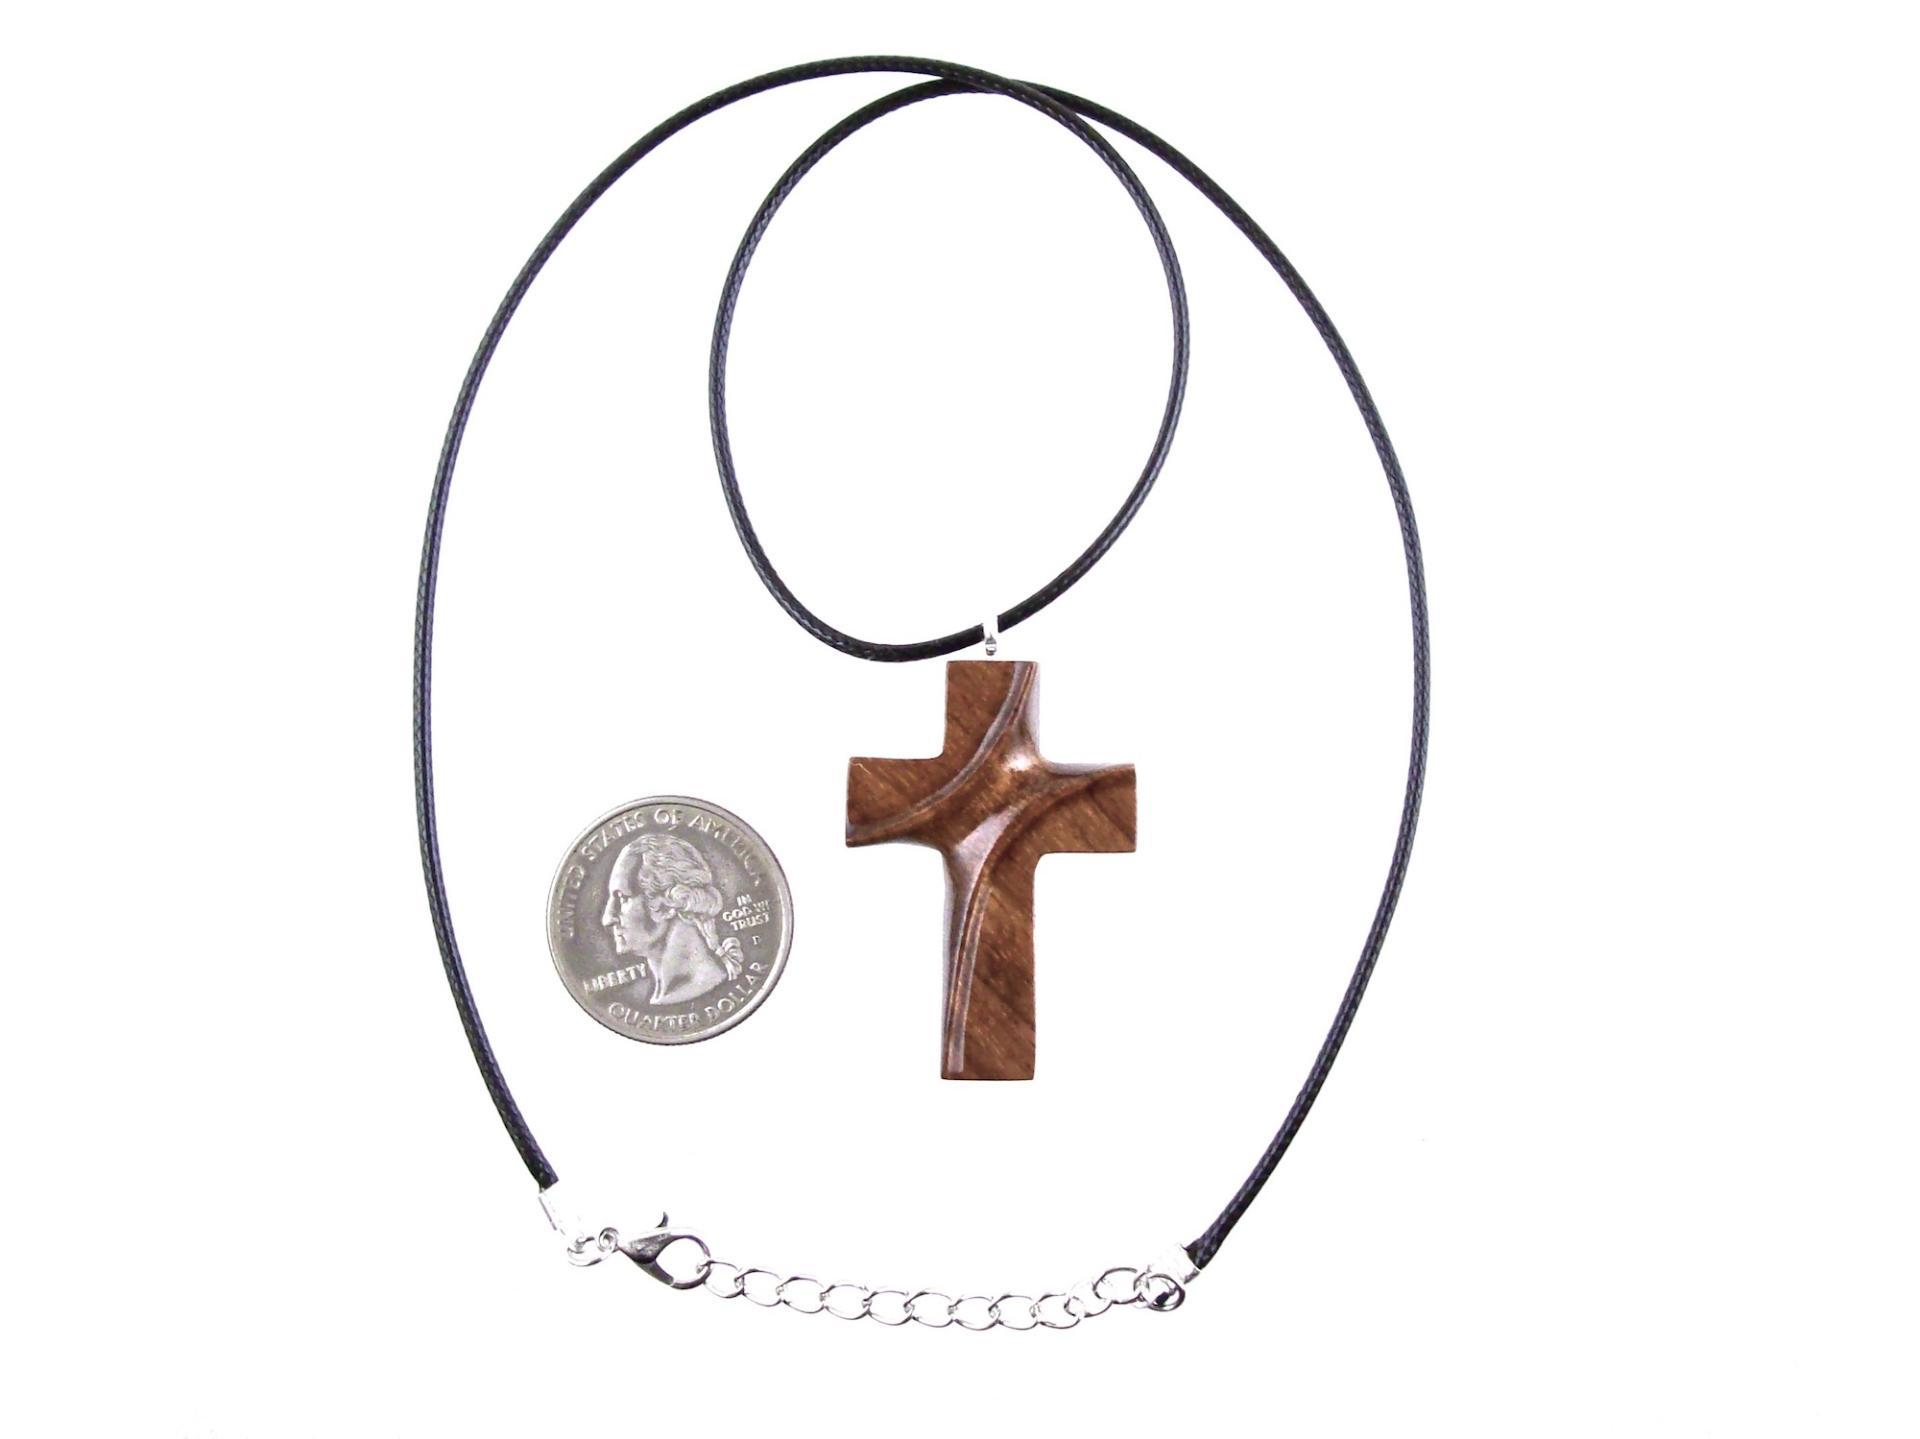 Wooden Cross Necklace, Hand Carved Wood Cross Pendant for Men or Women, Christian Jewelry Gift for Him or Her